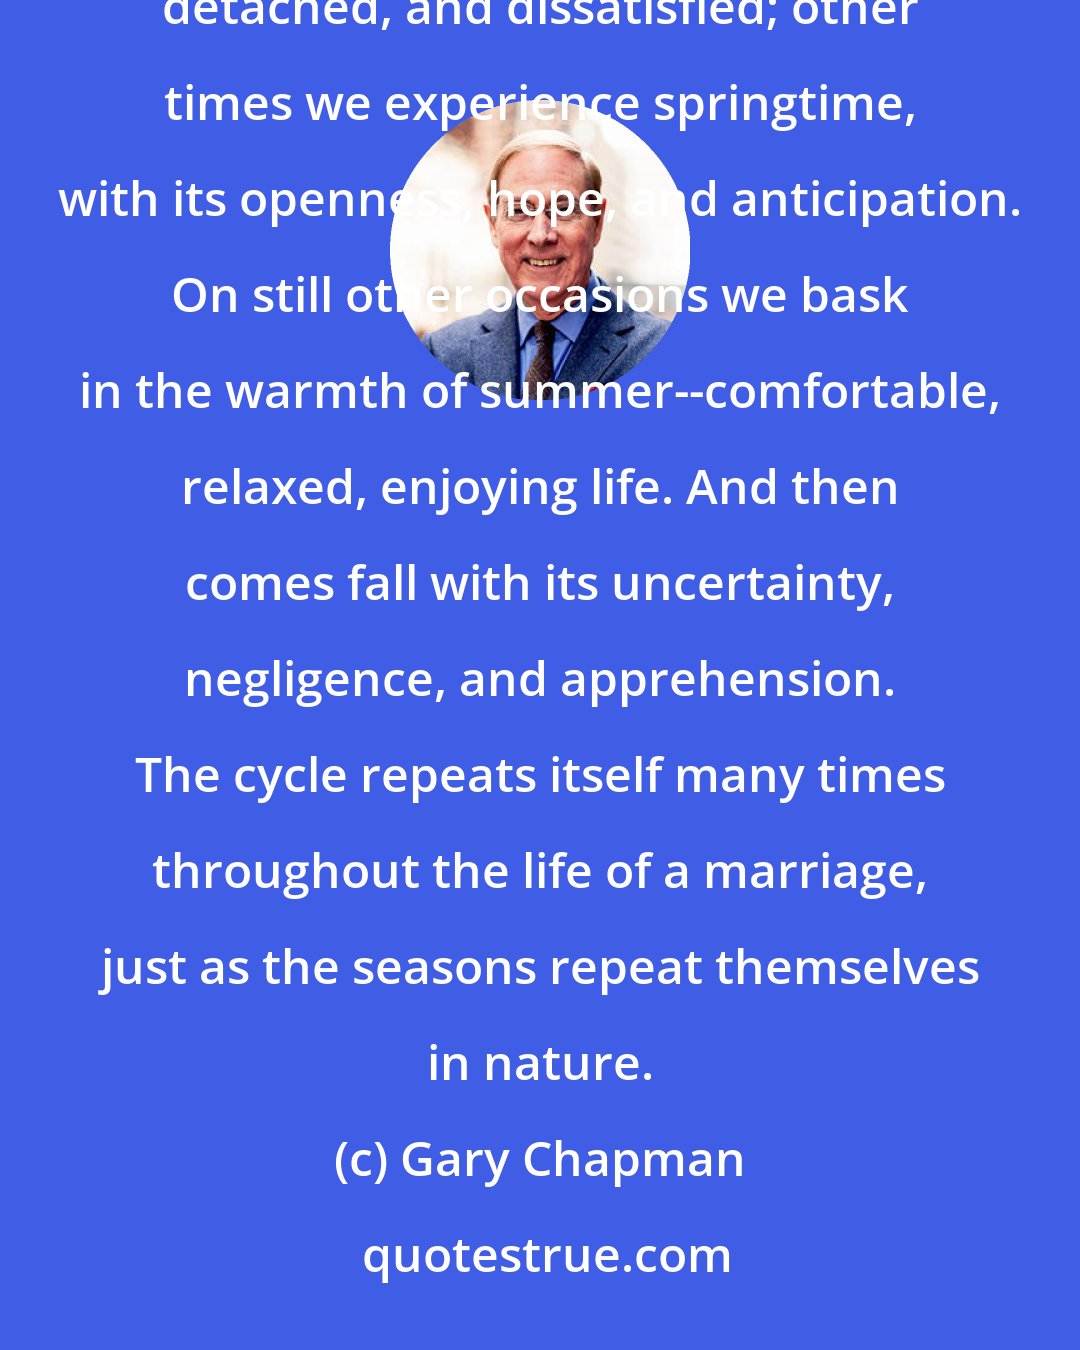 Gary Chapman: Marriages are always moving from one season to another. Sometimes we find ourselves in winter--discouraged, detached, and dissatisfied; other times we experience springtime, with its openness, hope, and anticipation. On still other occasions we bask in the warmth of summer--comfortable, relaxed, enjoying life. And then comes fall with its uncertainty, negligence, and apprehension. The cycle repeats itself many times throughout the life of a marriage, just as the seasons repeat themselves in nature.